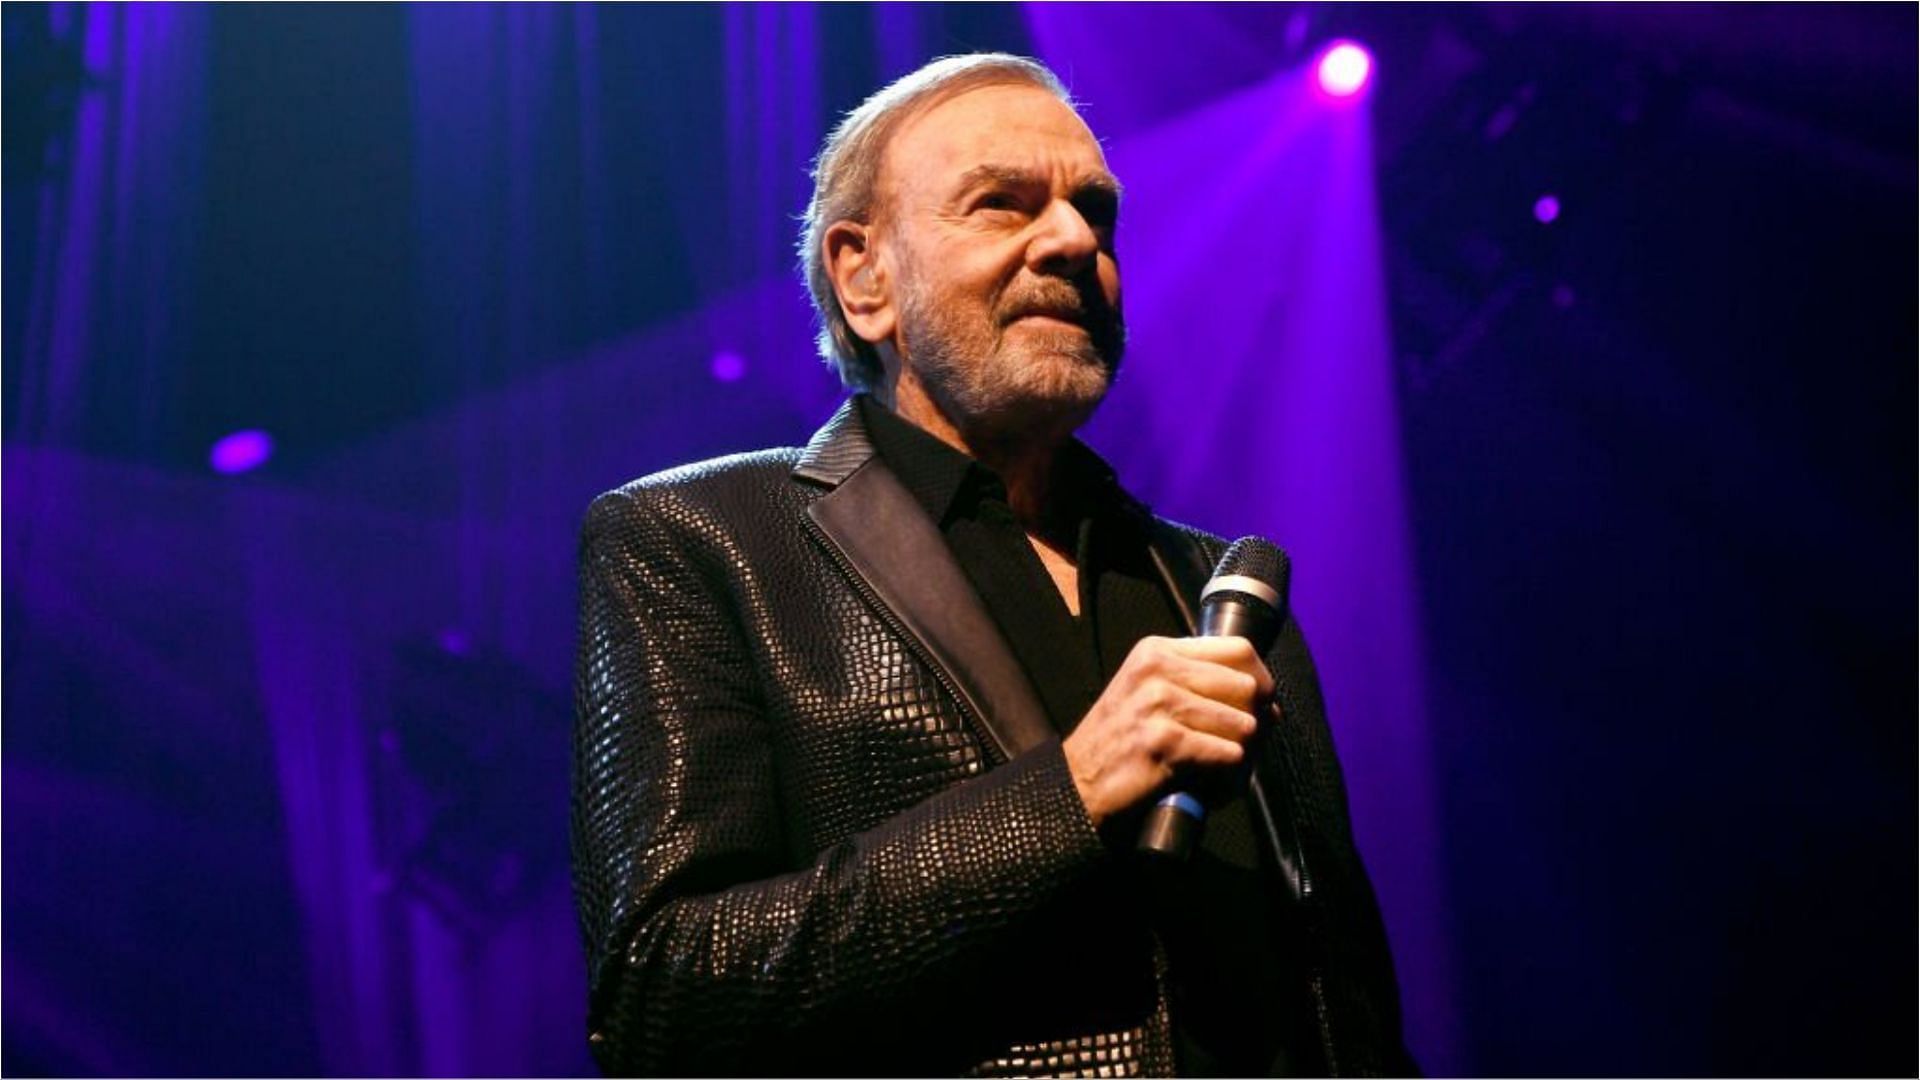 Neil Diamond Health, What disease does he have? - News